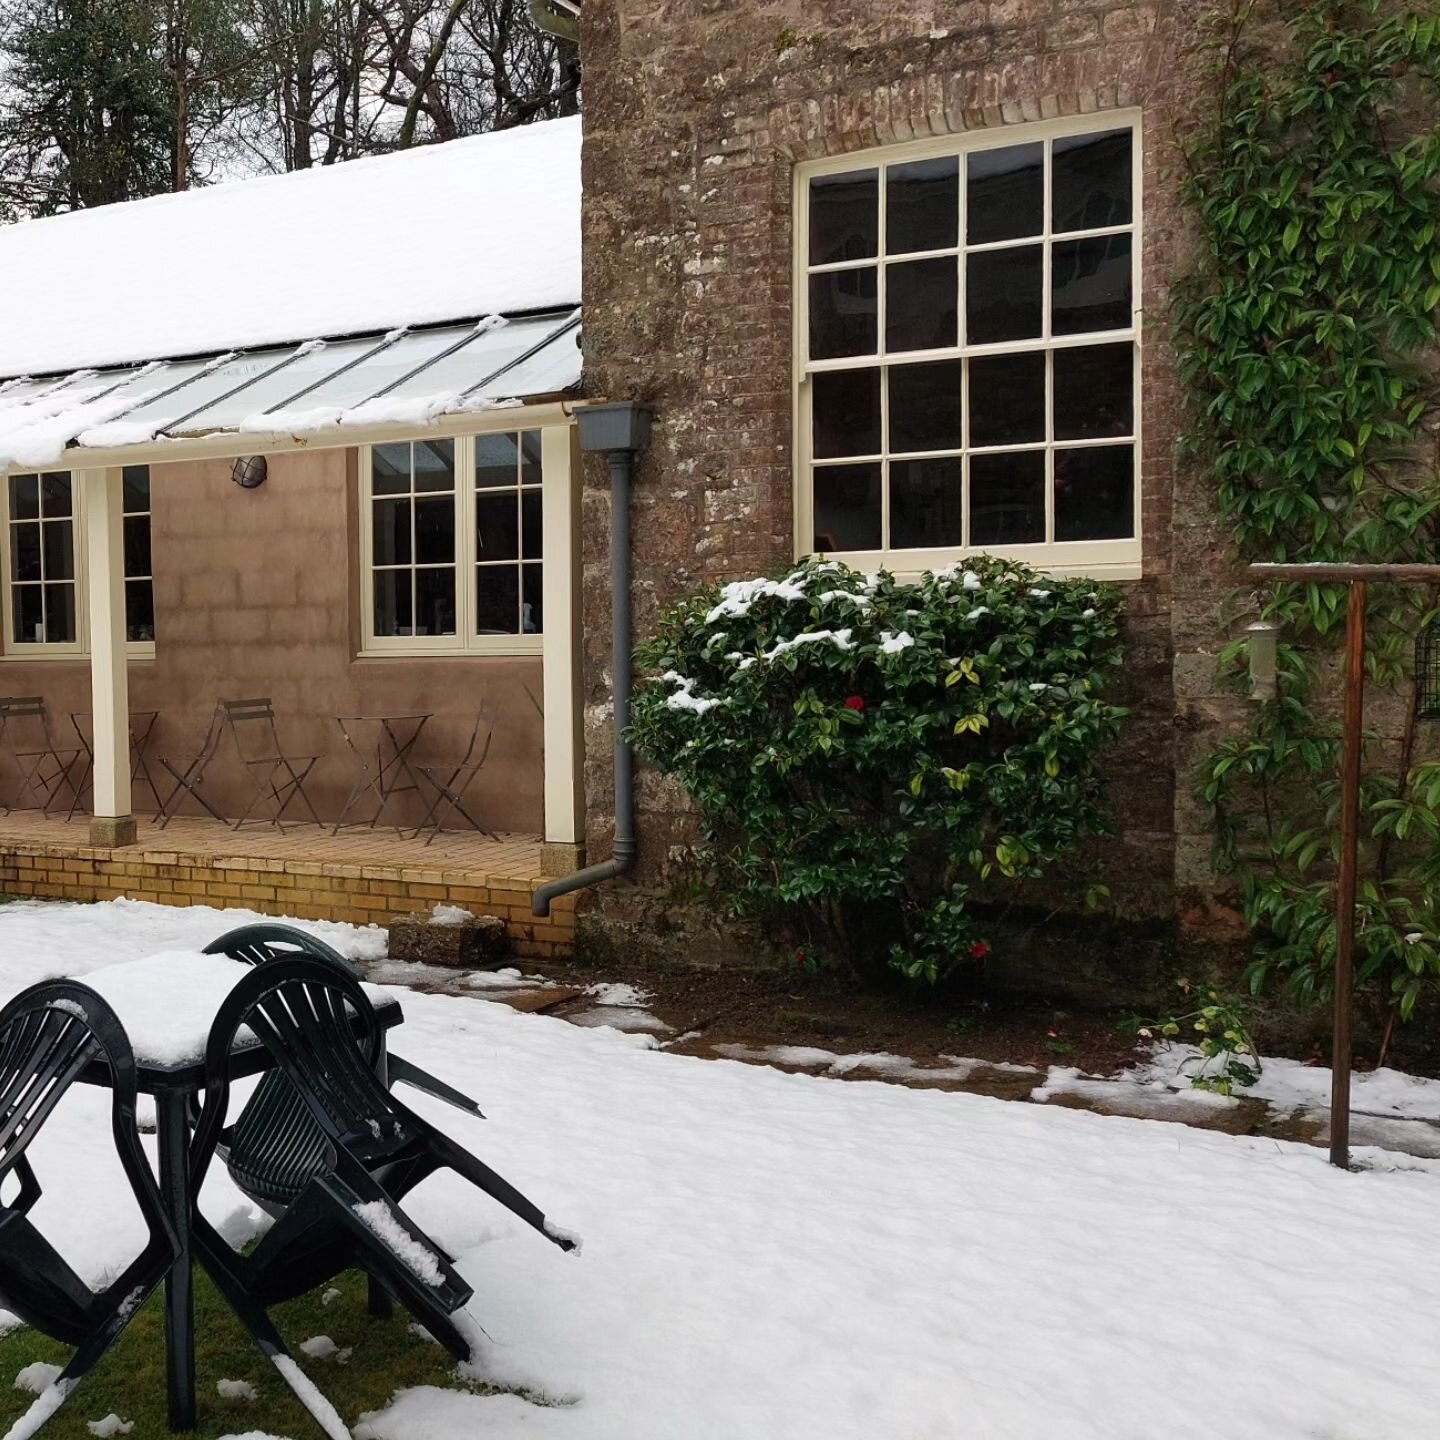 Crazy weather! After weeks of exceptionally mild temperatures, we suddenly get heavy snowfall. Luckily, rhododendrons are pretty tough.
The garden and tea room are open 11am to 5pm on Good Friday, Easter Sunday and Easter Monday, then on Wednesdays, 